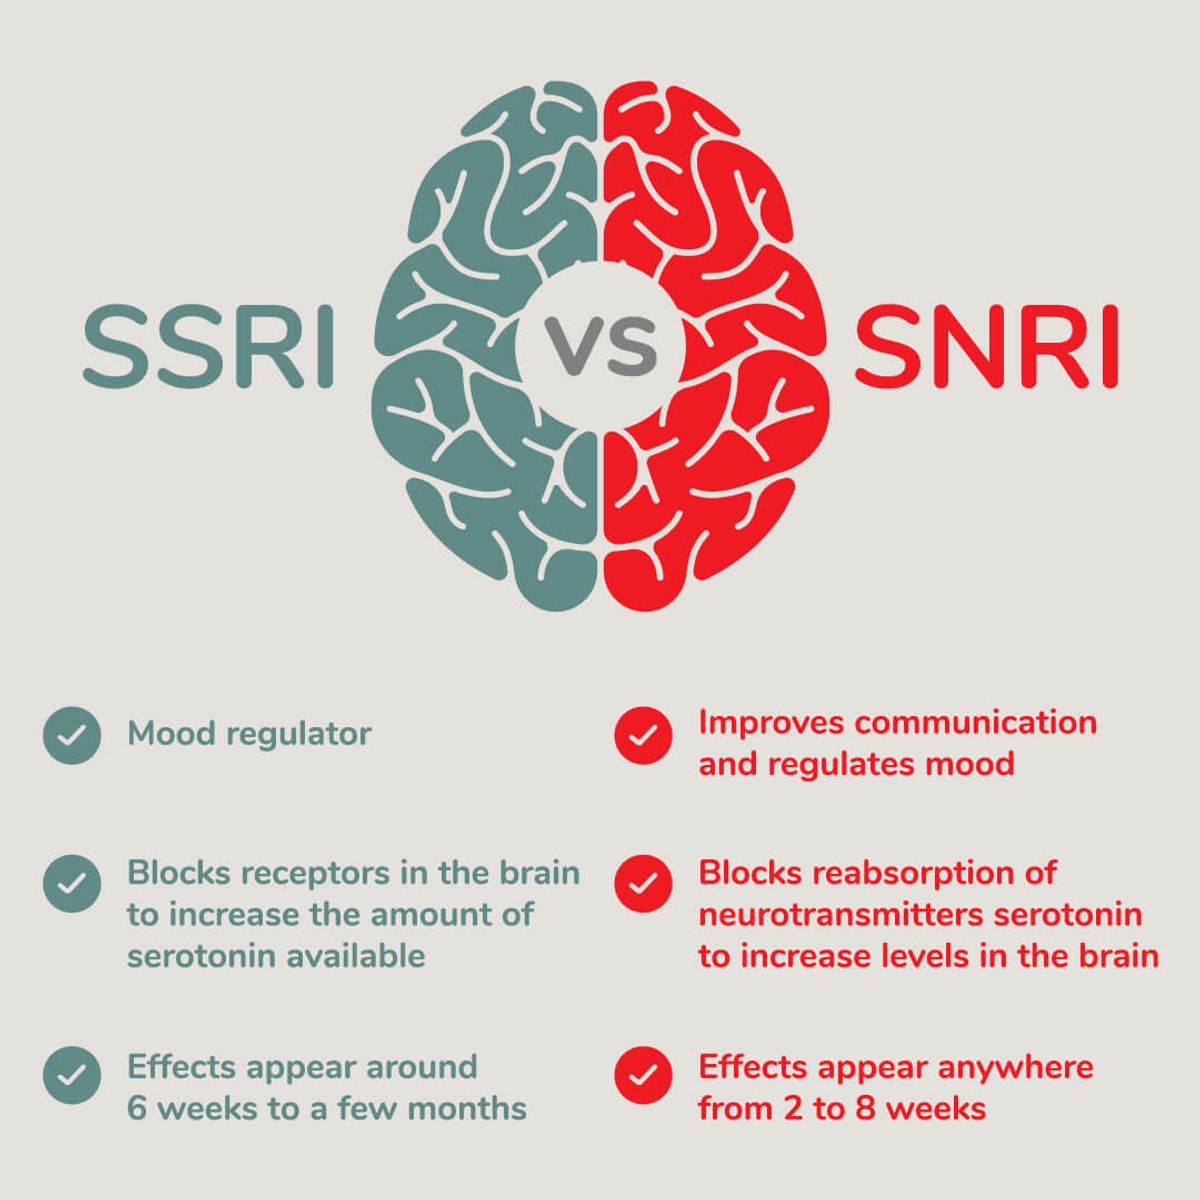 Comparison Between SSRI and SNRI Anxiety Medications